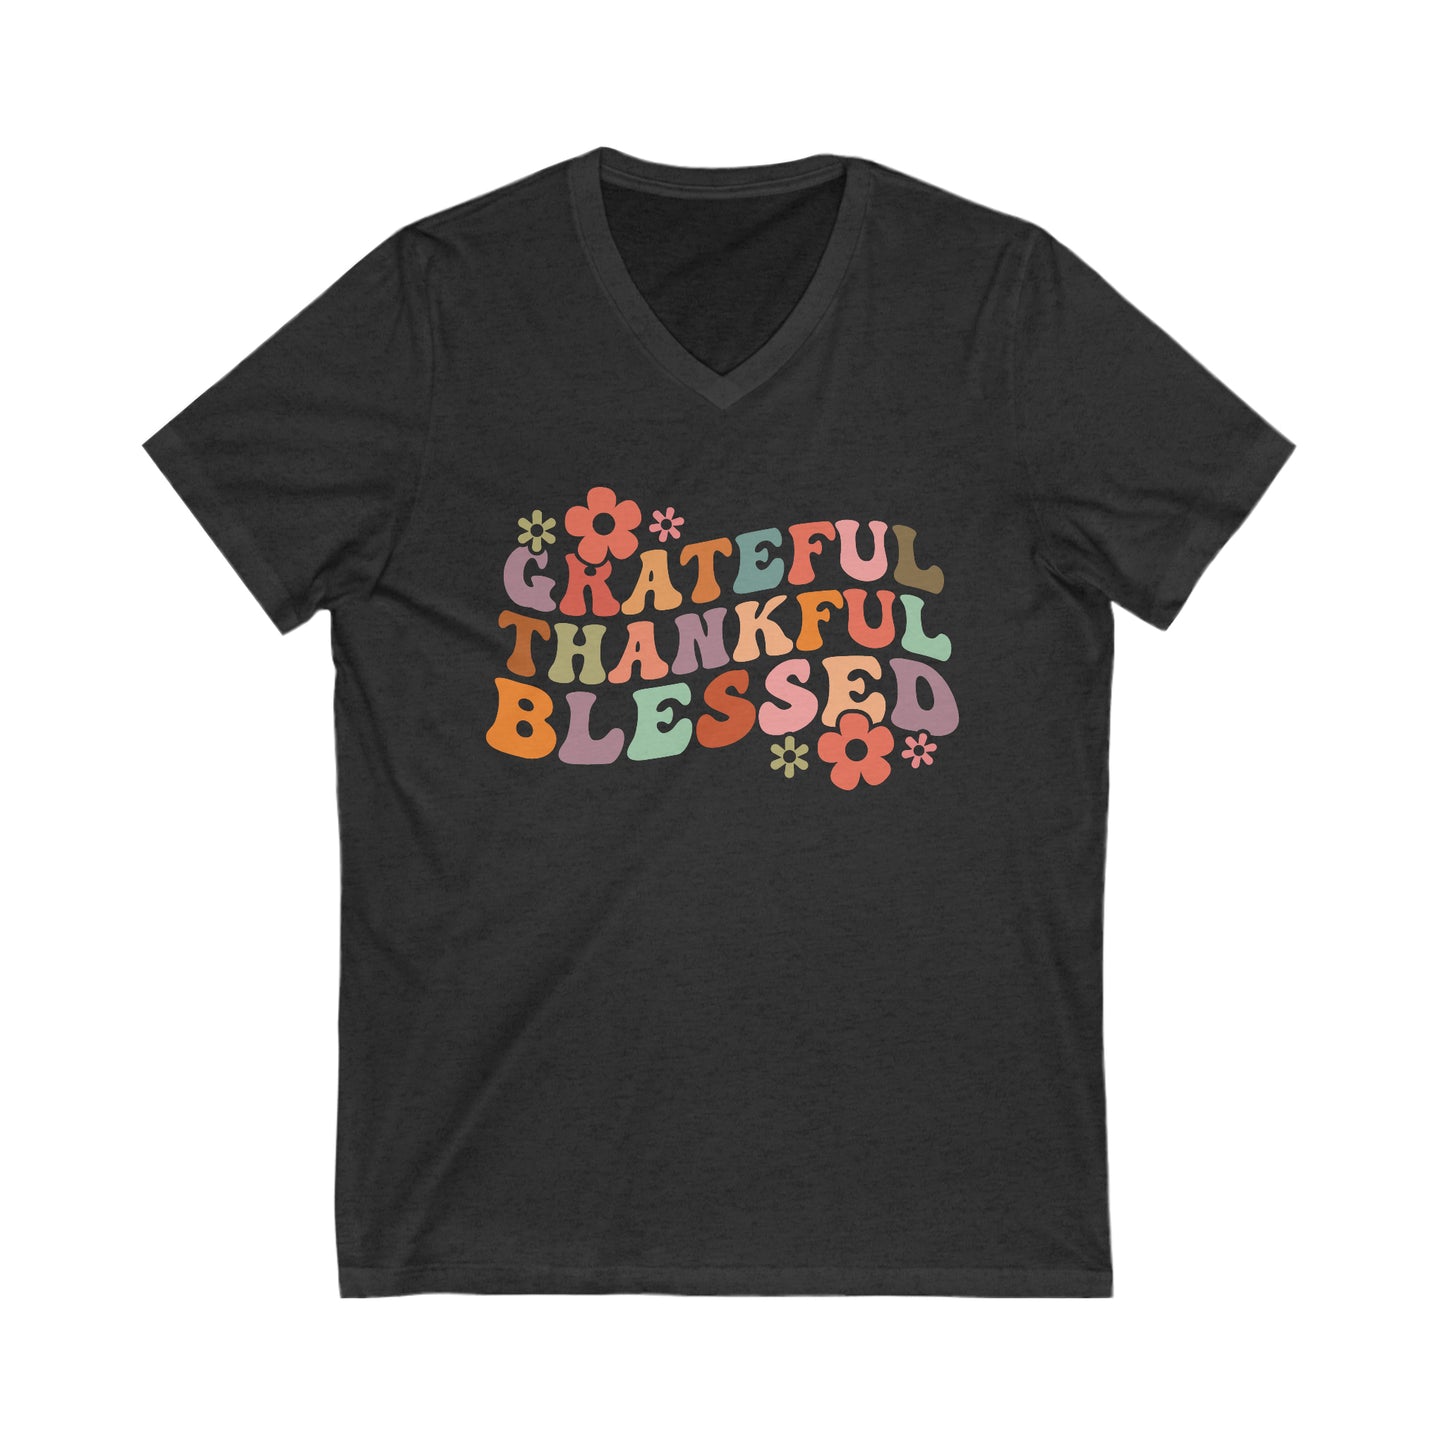 Retro Thanksgiving T-Shirt For Blessed T Shirt For Thankful TShirt For Grateful Tee For Turkey Day